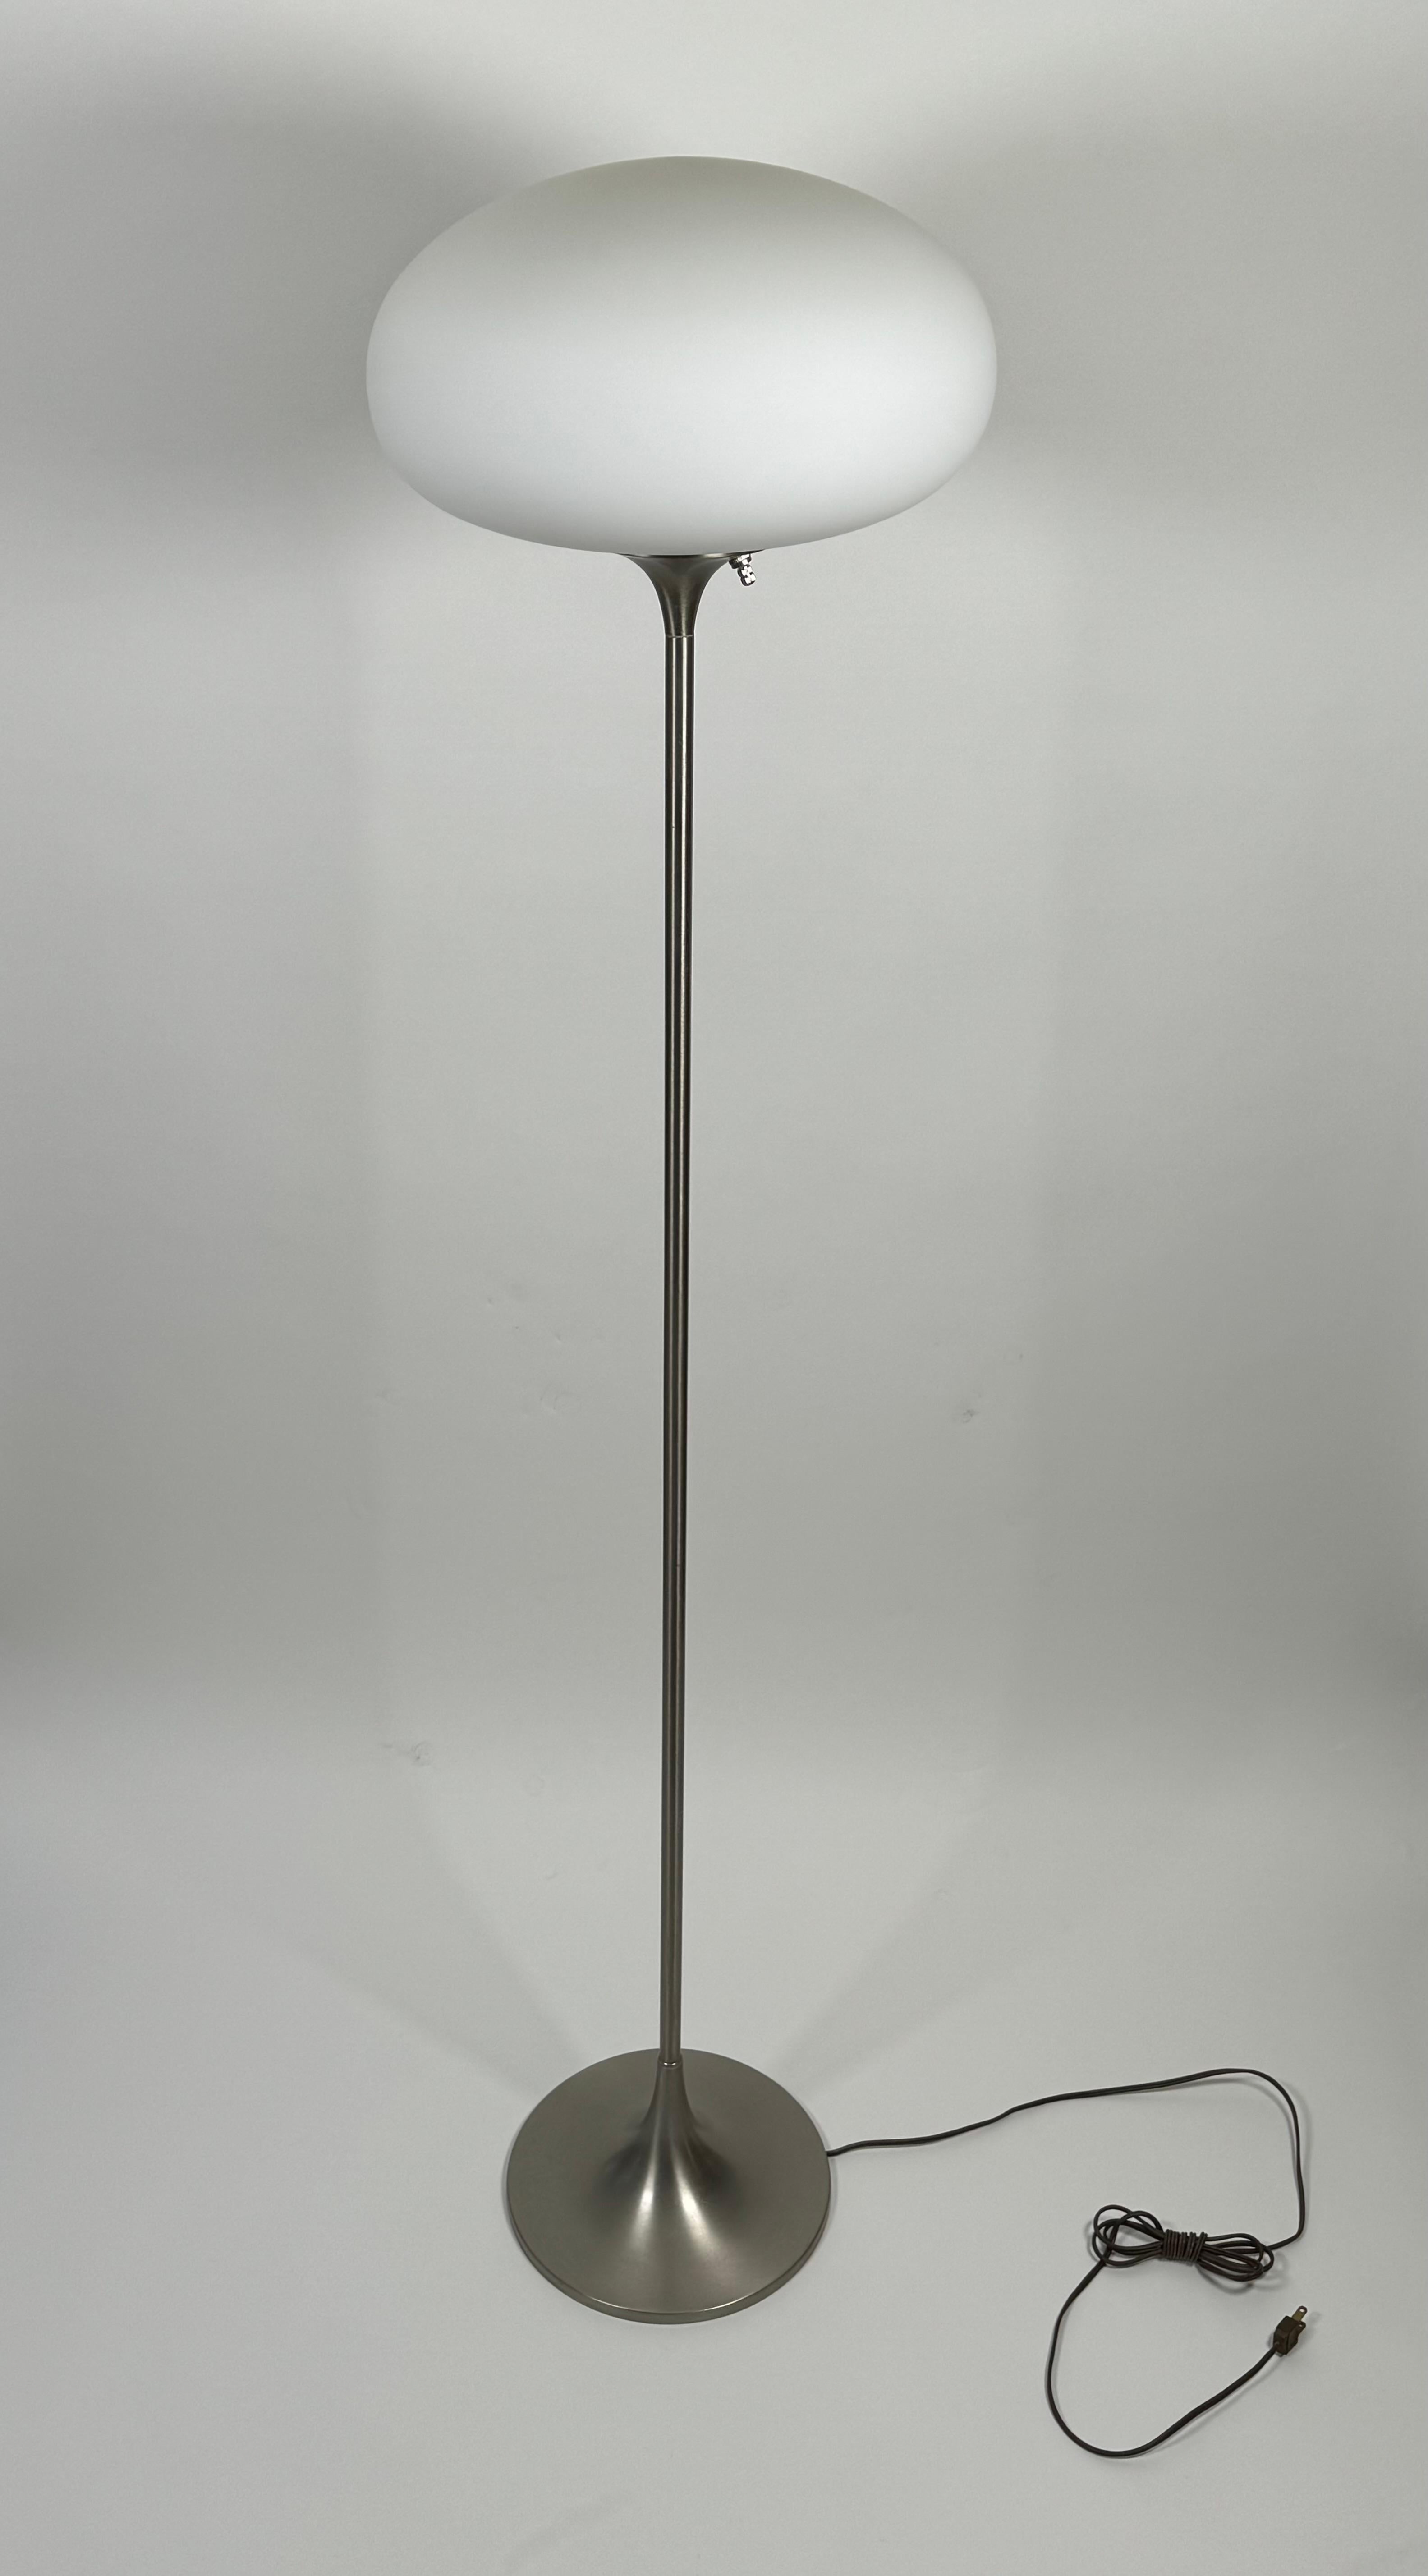 Mushroom Laurel floor lamp in a brushed chrome finish with a tulip base. The graceful form creates a soft light from it's frosted shade.